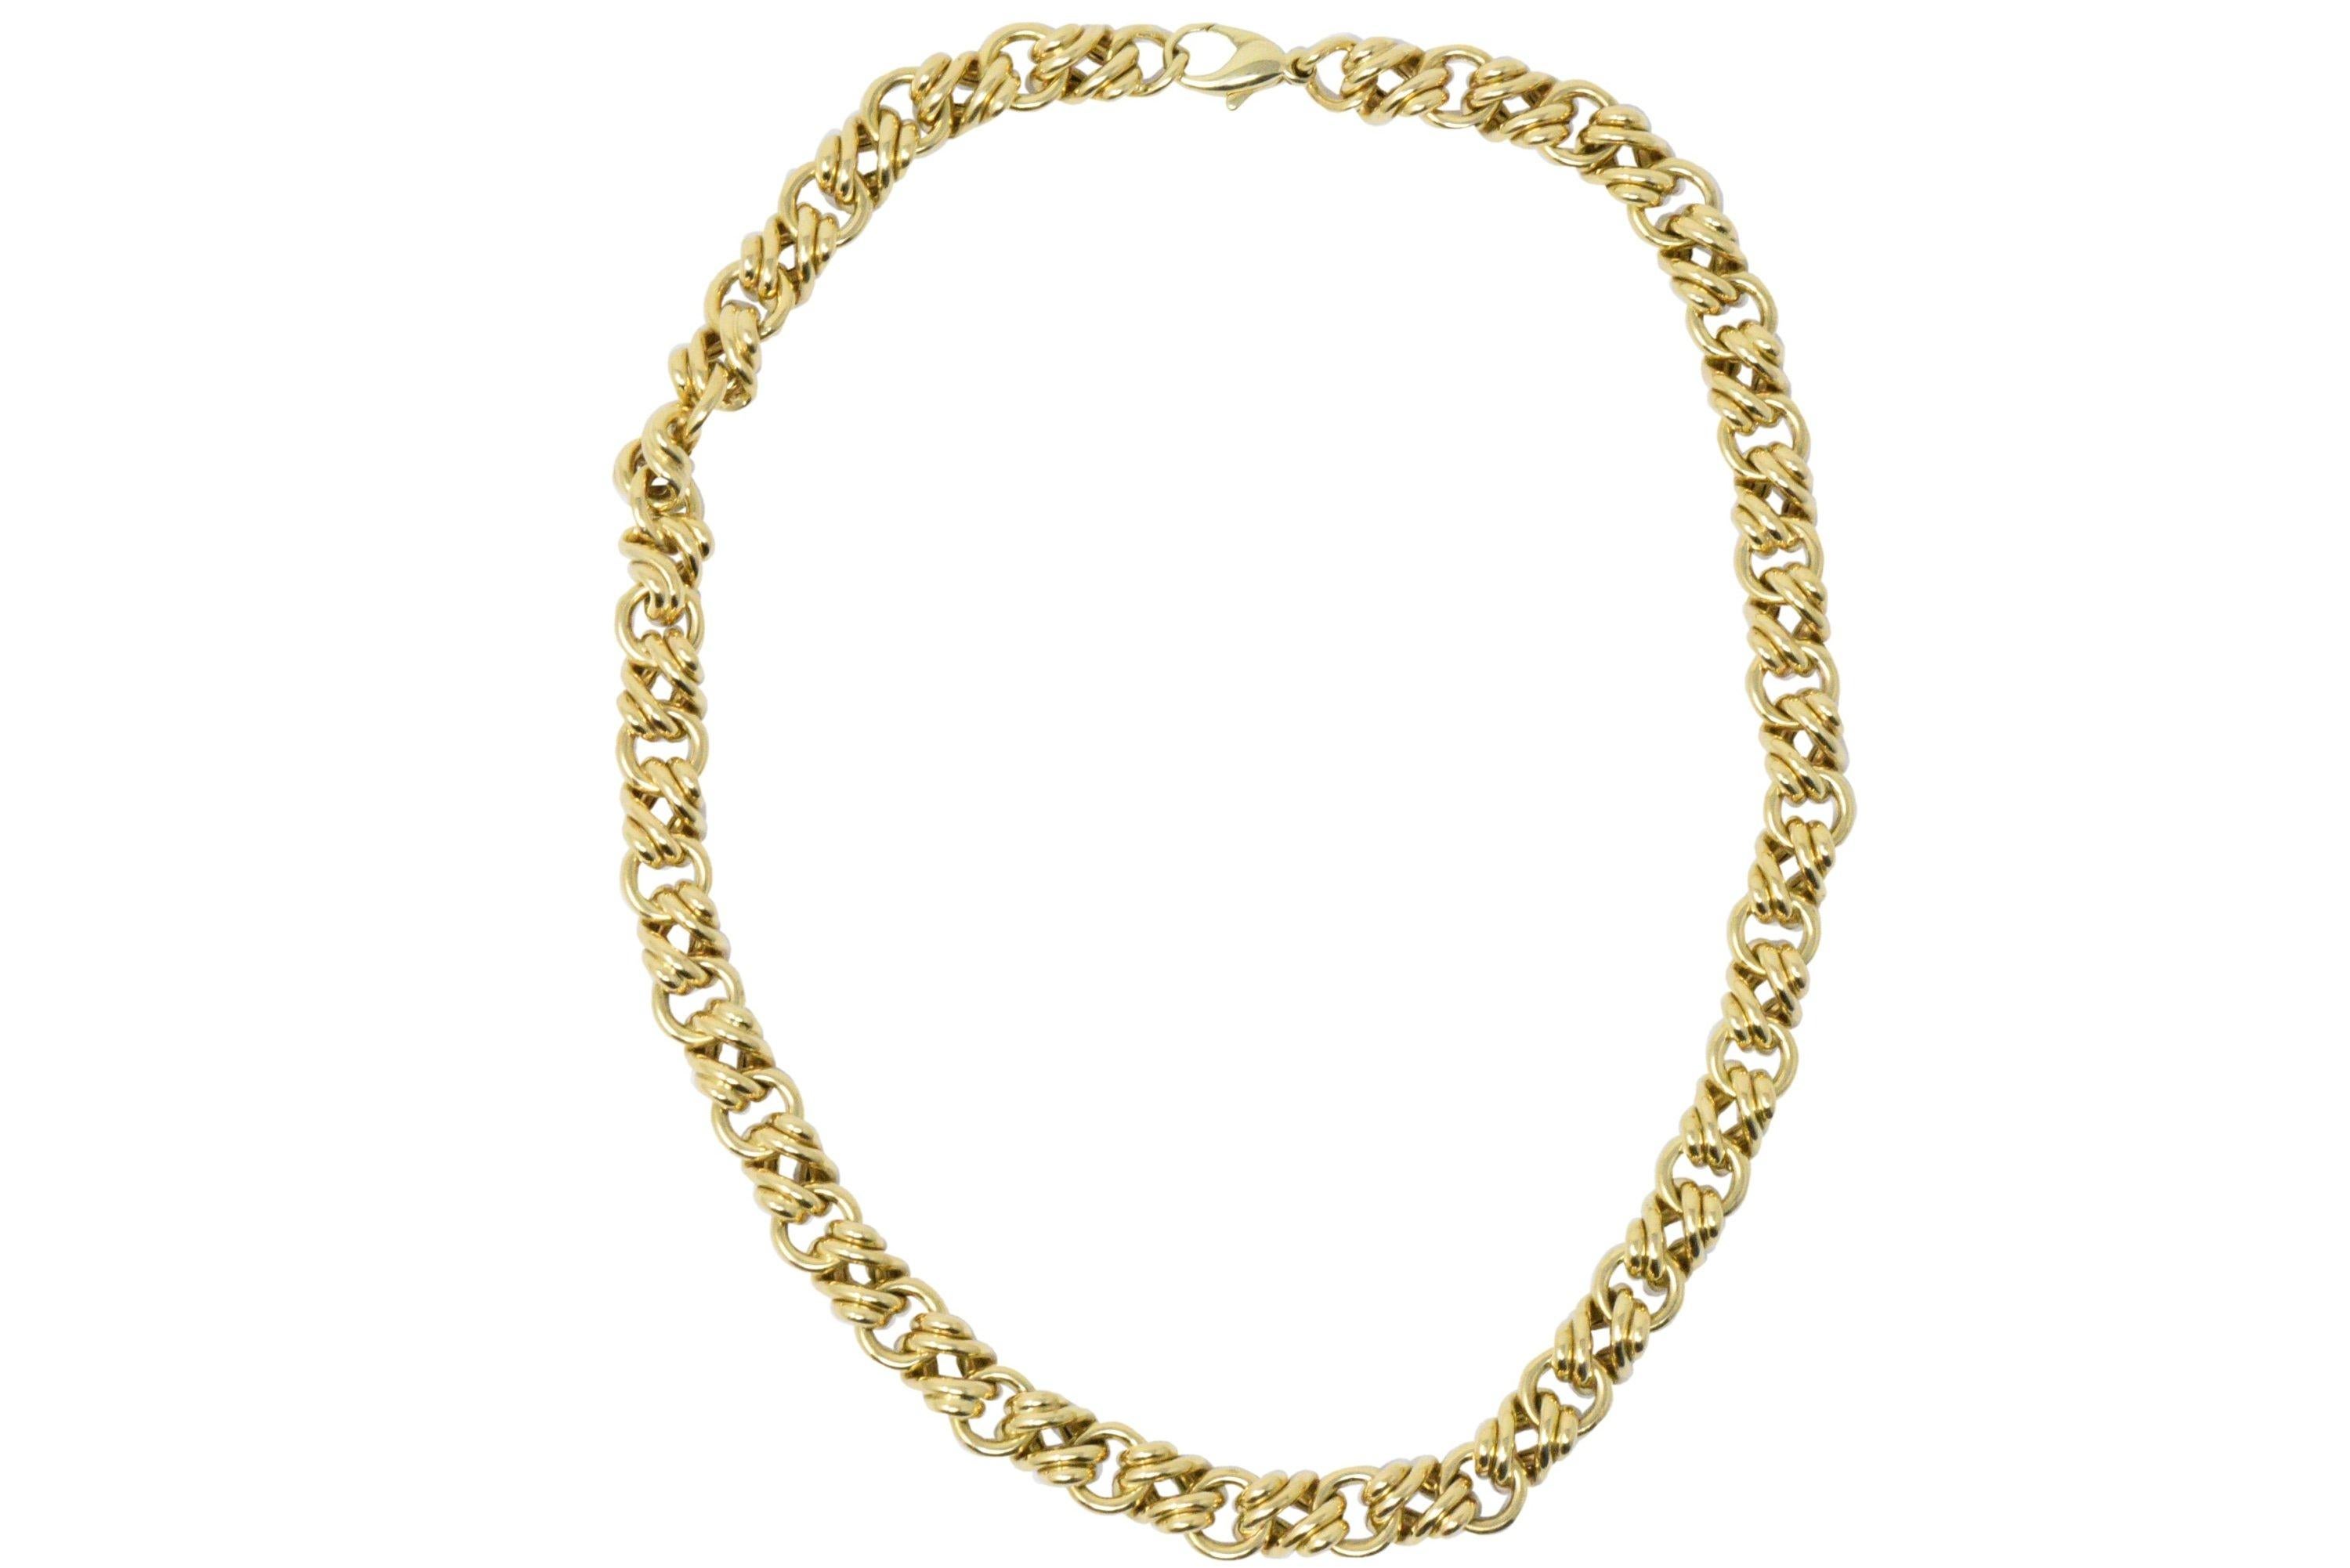 Women's or Men's Sophisticated Tiffany & Co. 18 Karat Gold Twisted Link Collar Necklace